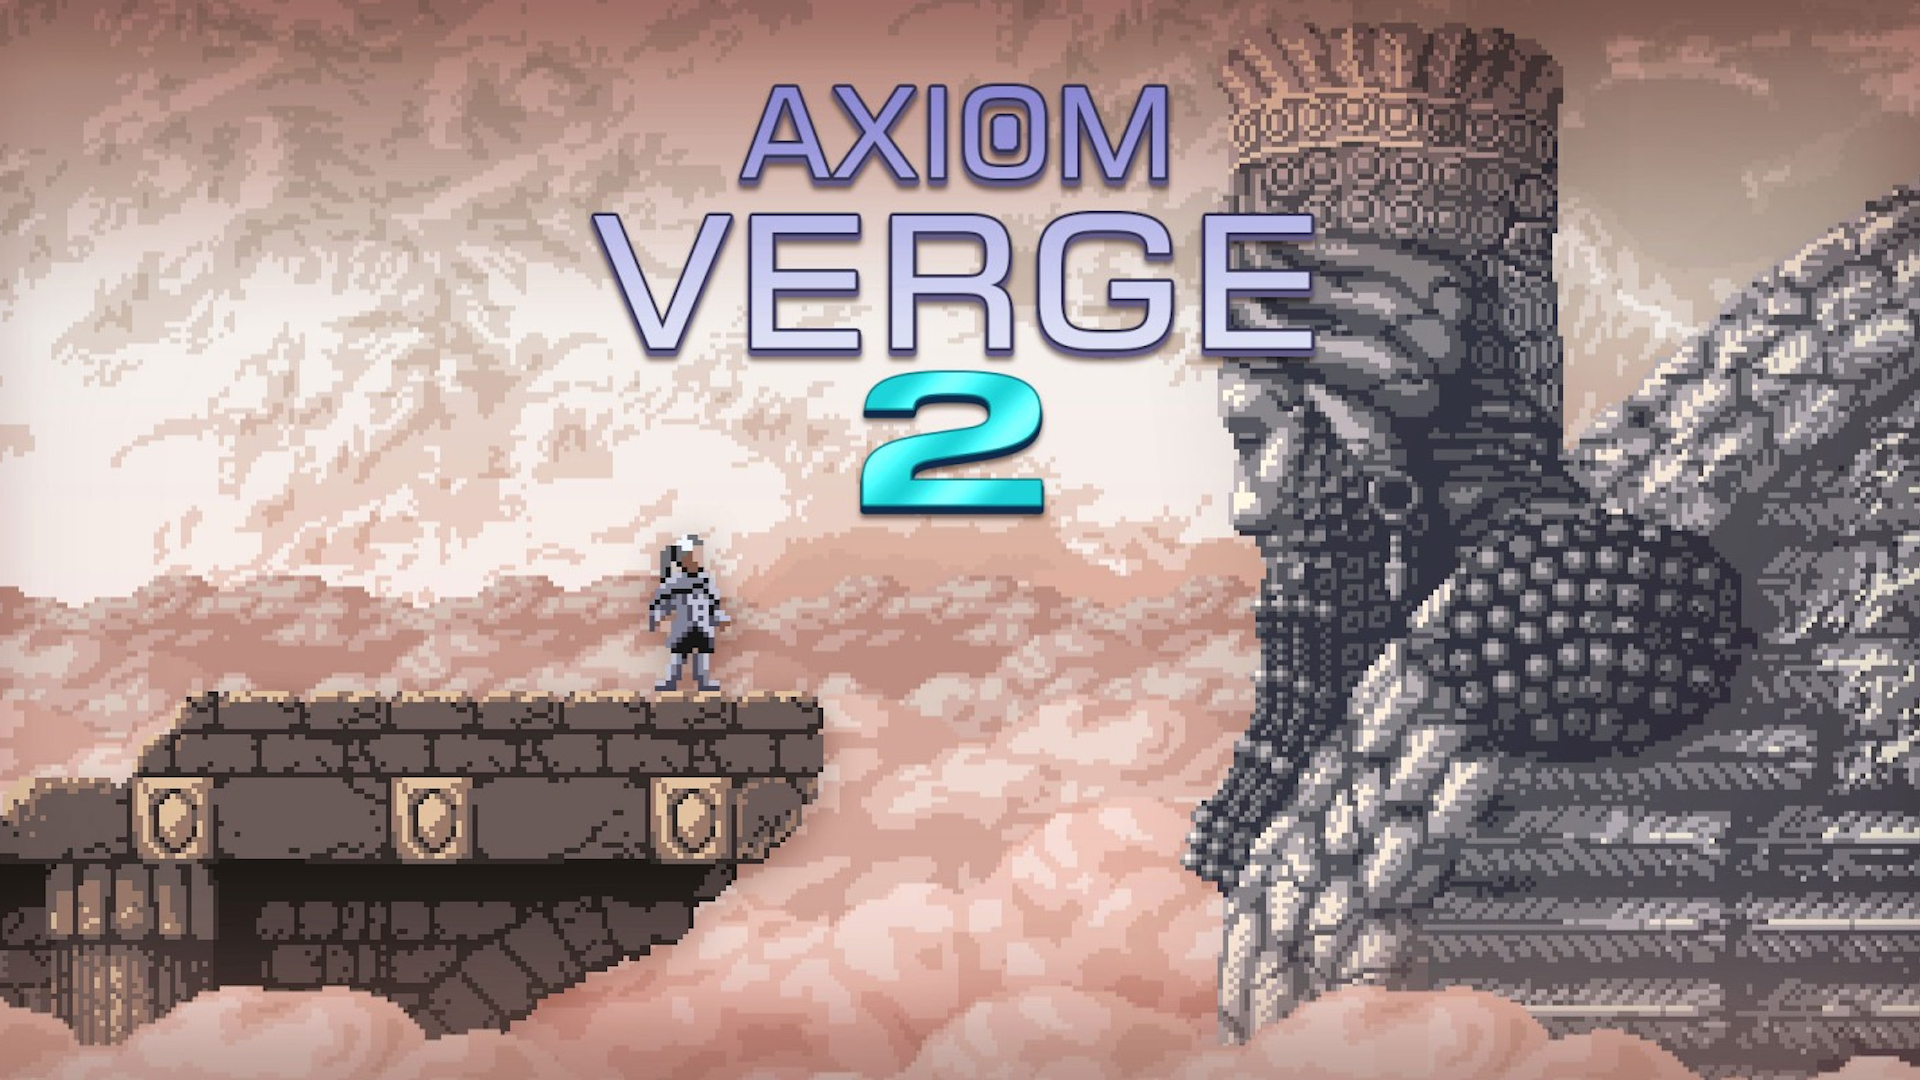 Axiom Verge 2 is Out Now on Xbox